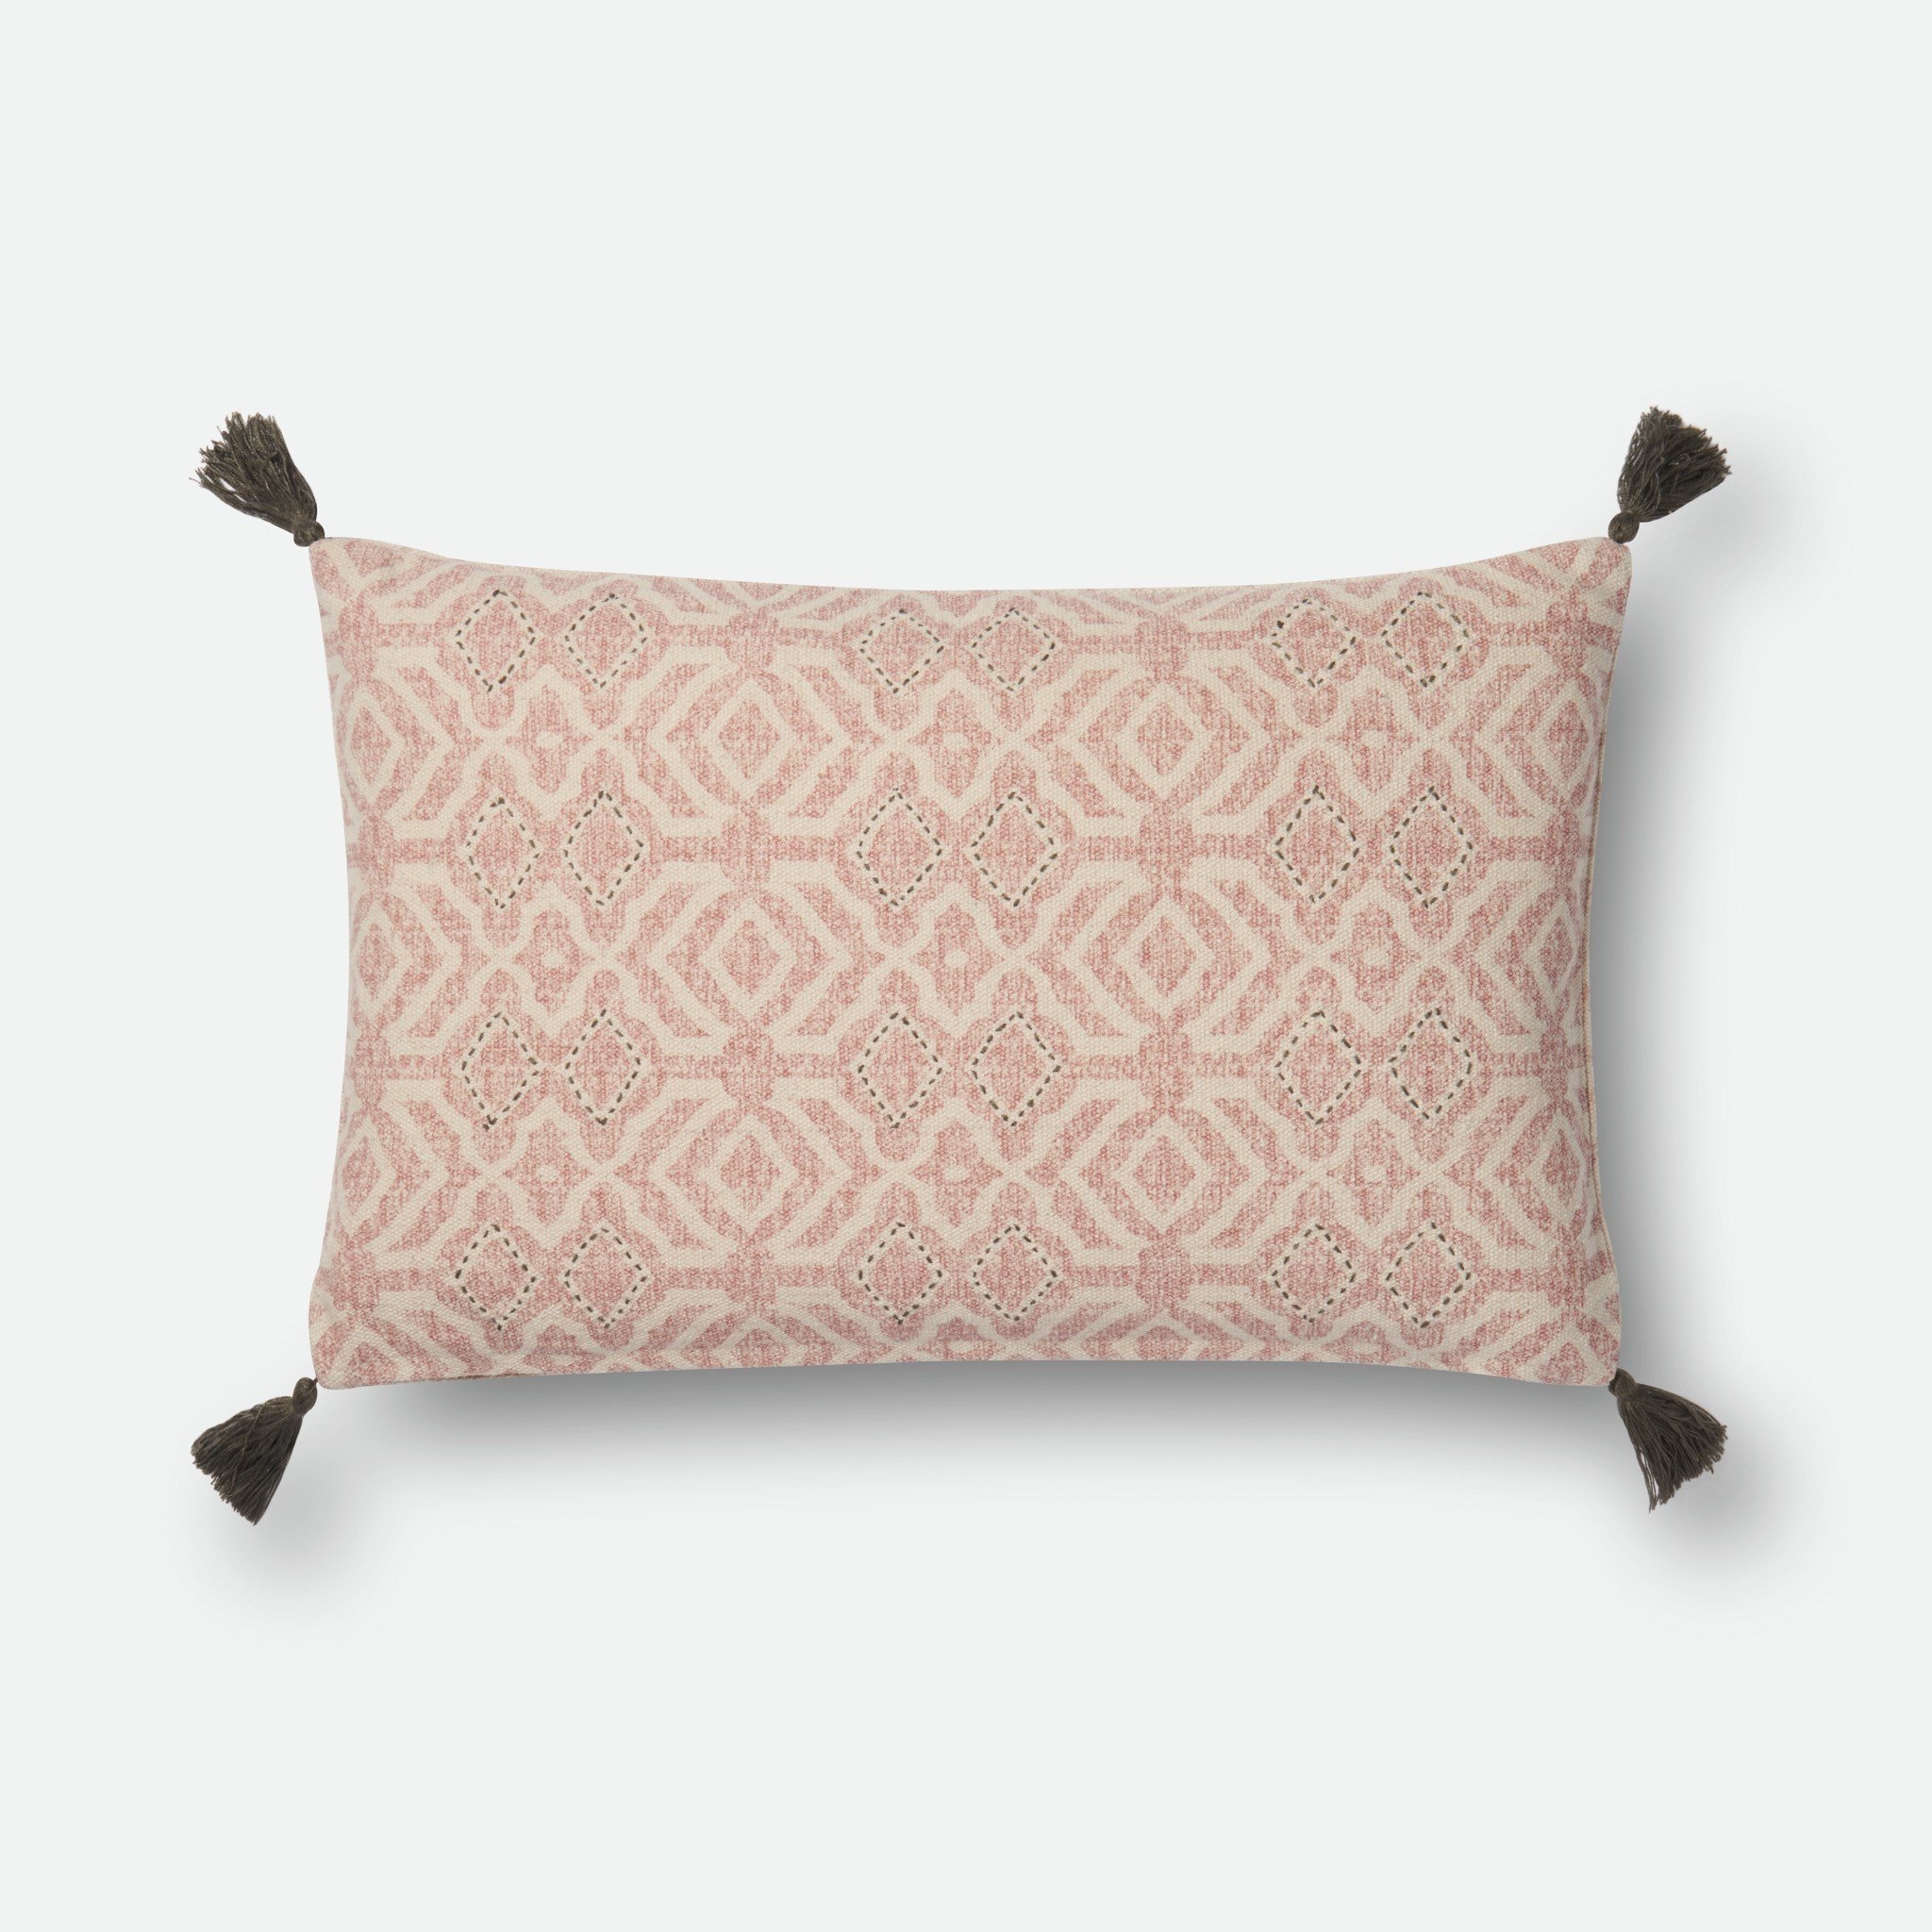 PILLOWS Pillow NATURAL / PINK 13" X 21" Cover w/Down - Image 0